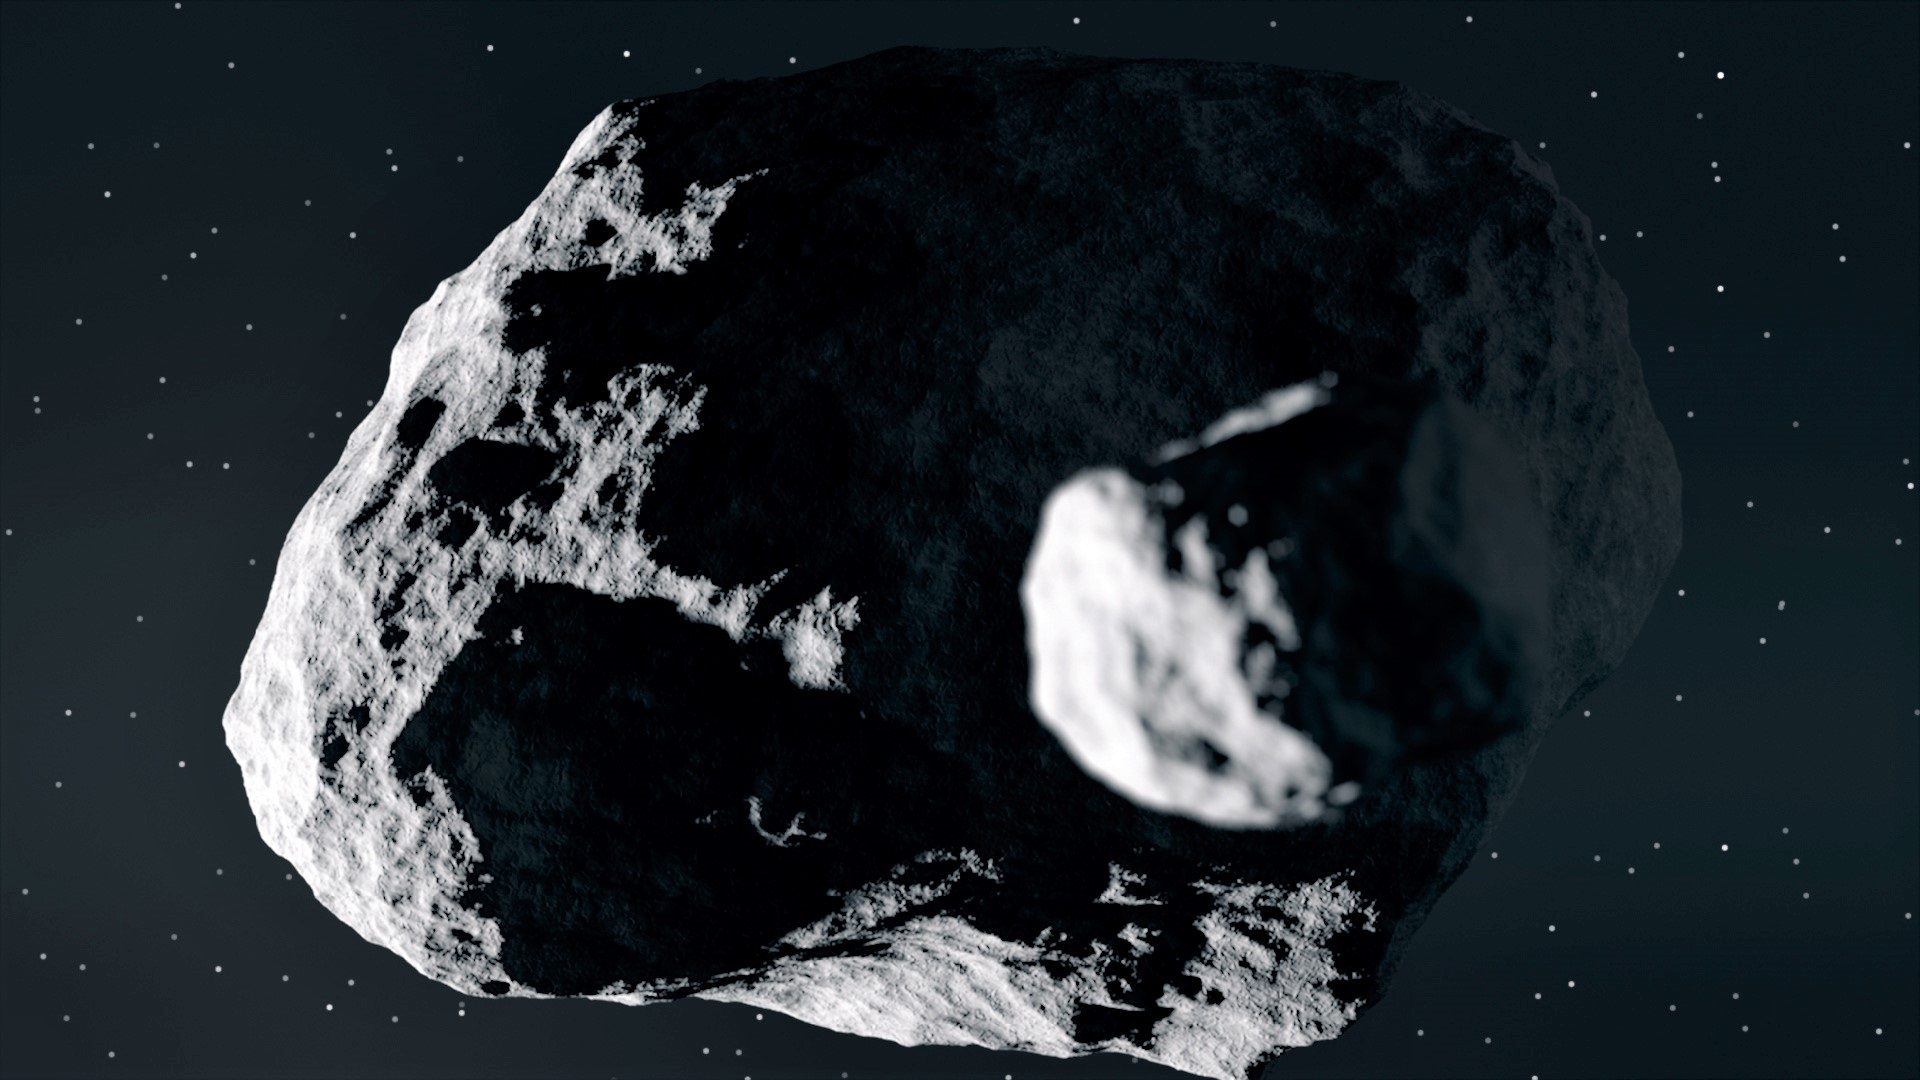 Didymus (large asteroid) and Dimorphos (small)